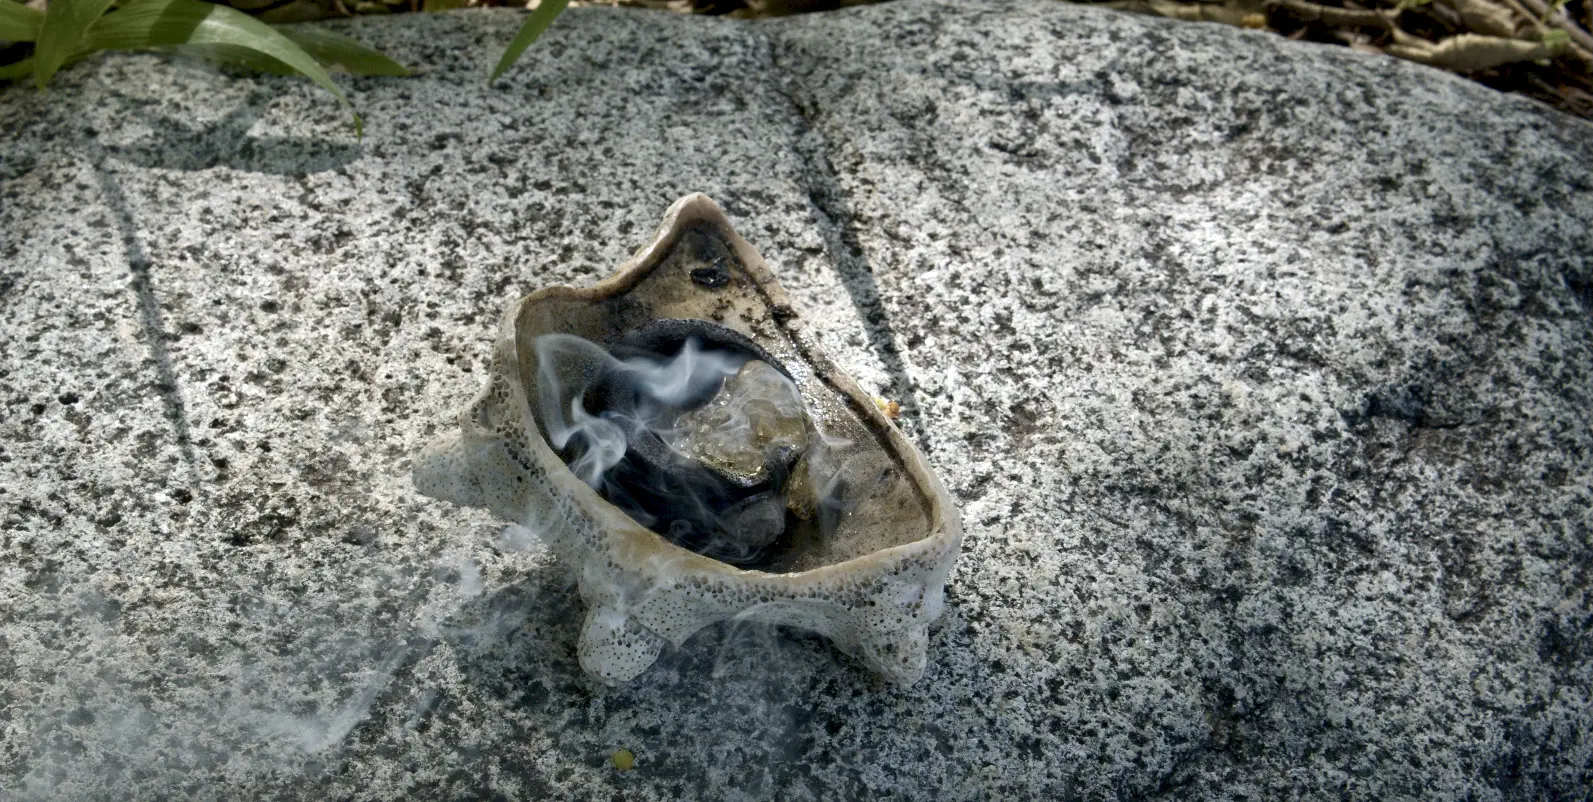 Smoke billows from a carved out conch shell